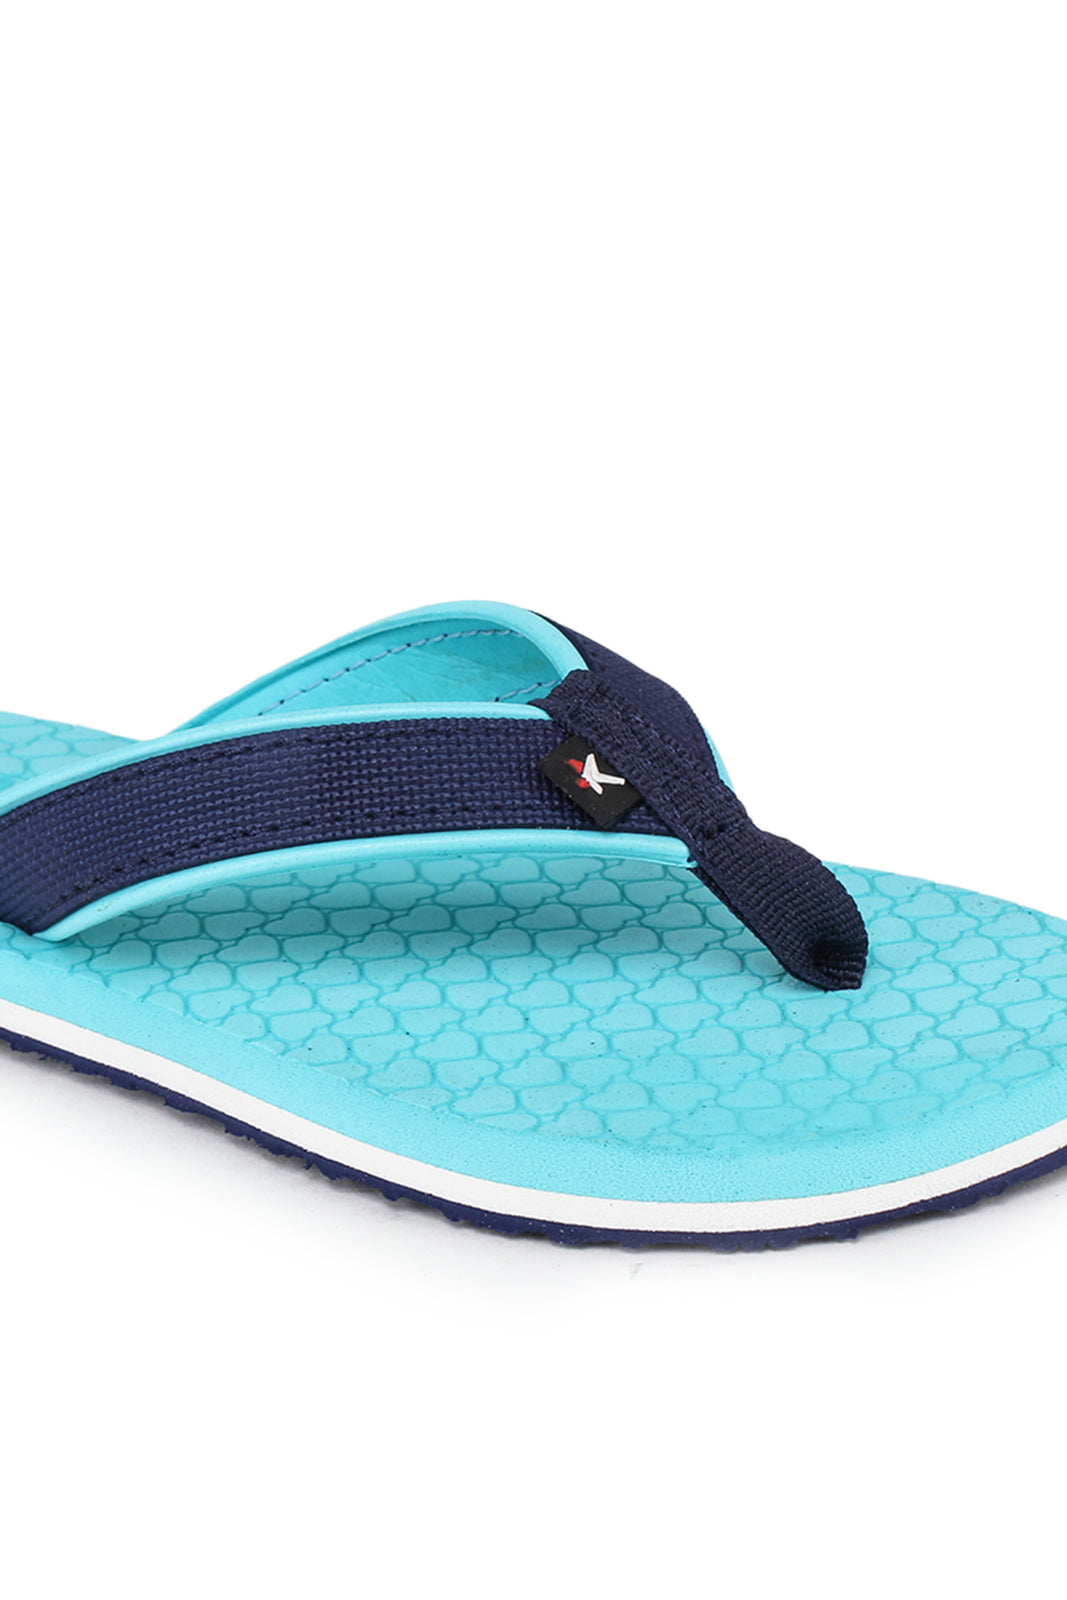 Blue Solid Rubber Slip On Casual Slippers For Women